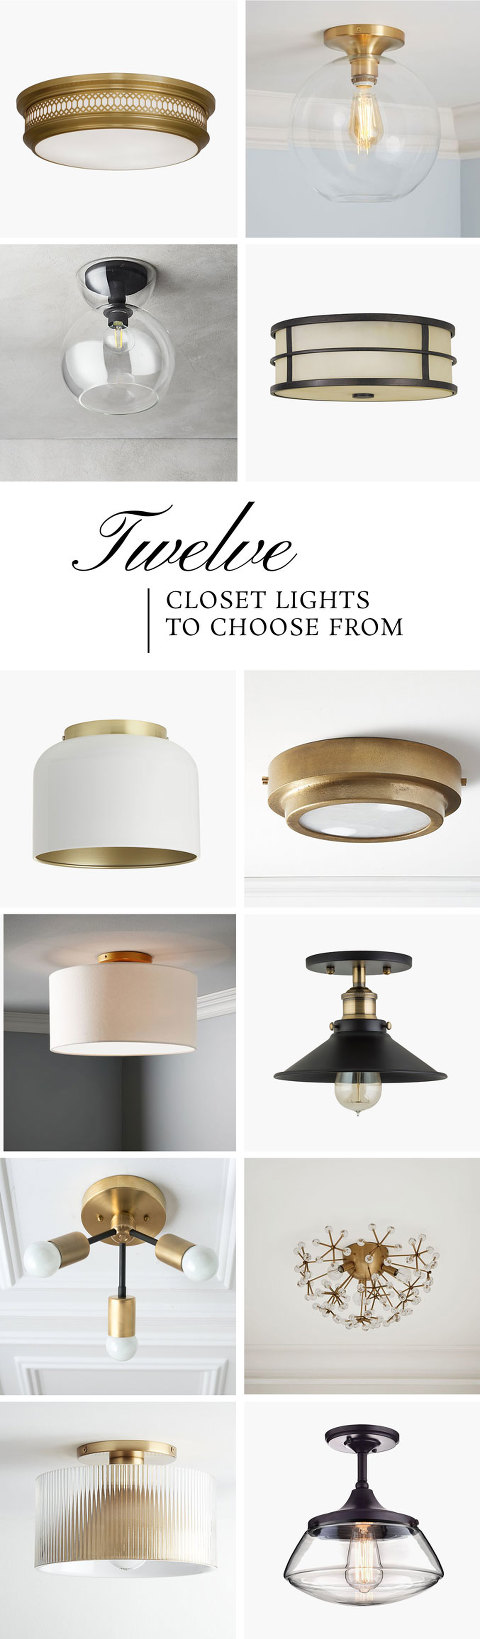 12 Closet Lights To Choose From